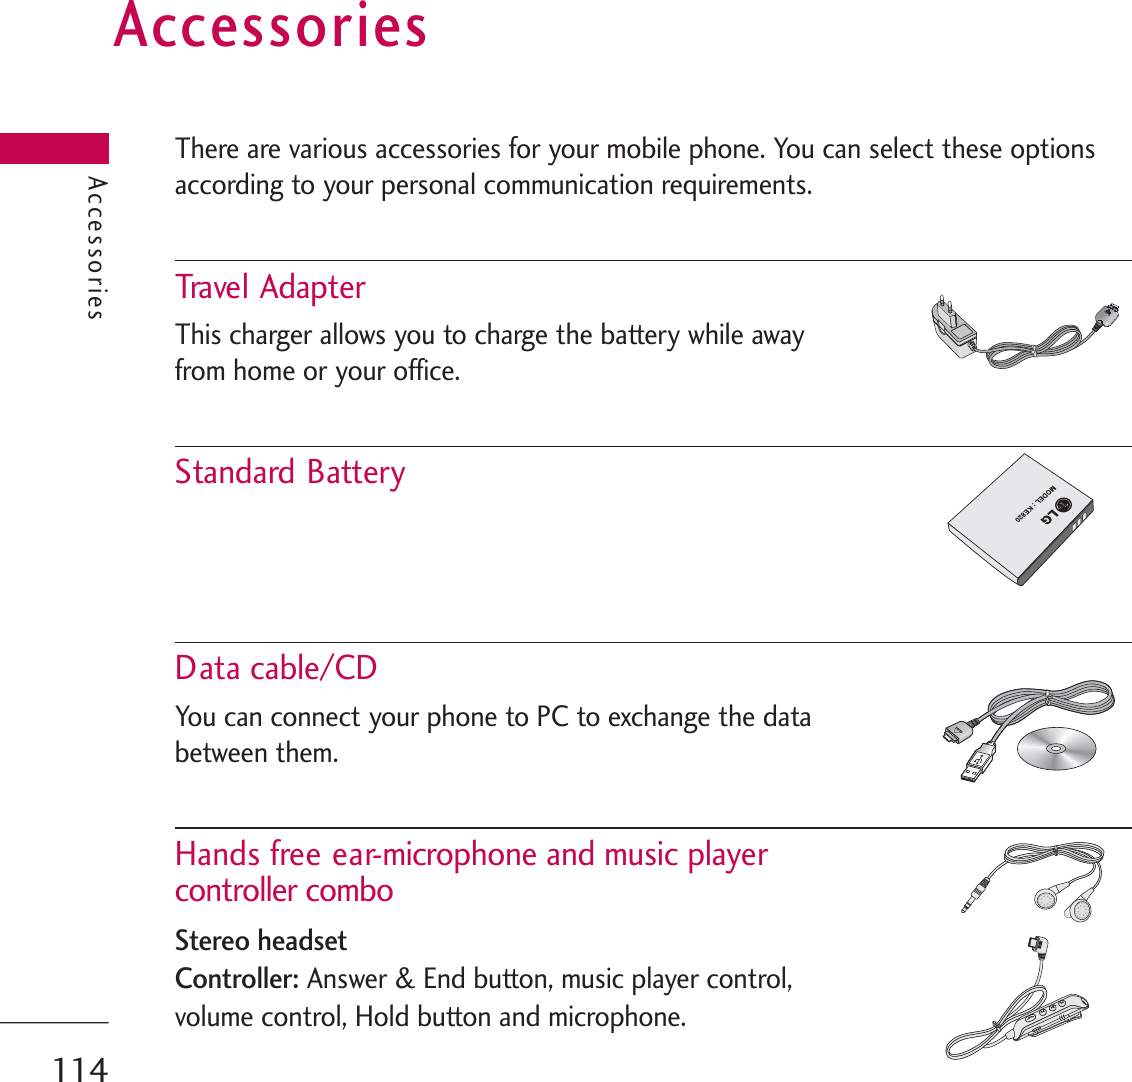 AccessoriesThere are various accessories for your mobile phone. You can select these optionsaccording to your personal communication requirements.Trave l  Adapt erThis charger allows you to charge the battery while away from home or your office.Standard BatteryData cable/CDYou can connect your phone to PC to exchange the databetween them.Hands free ear-microphone and music player controller comboStereo headsetController:Answer &amp; End button, music player control, volume control, Hold button and microphone. Accessories114